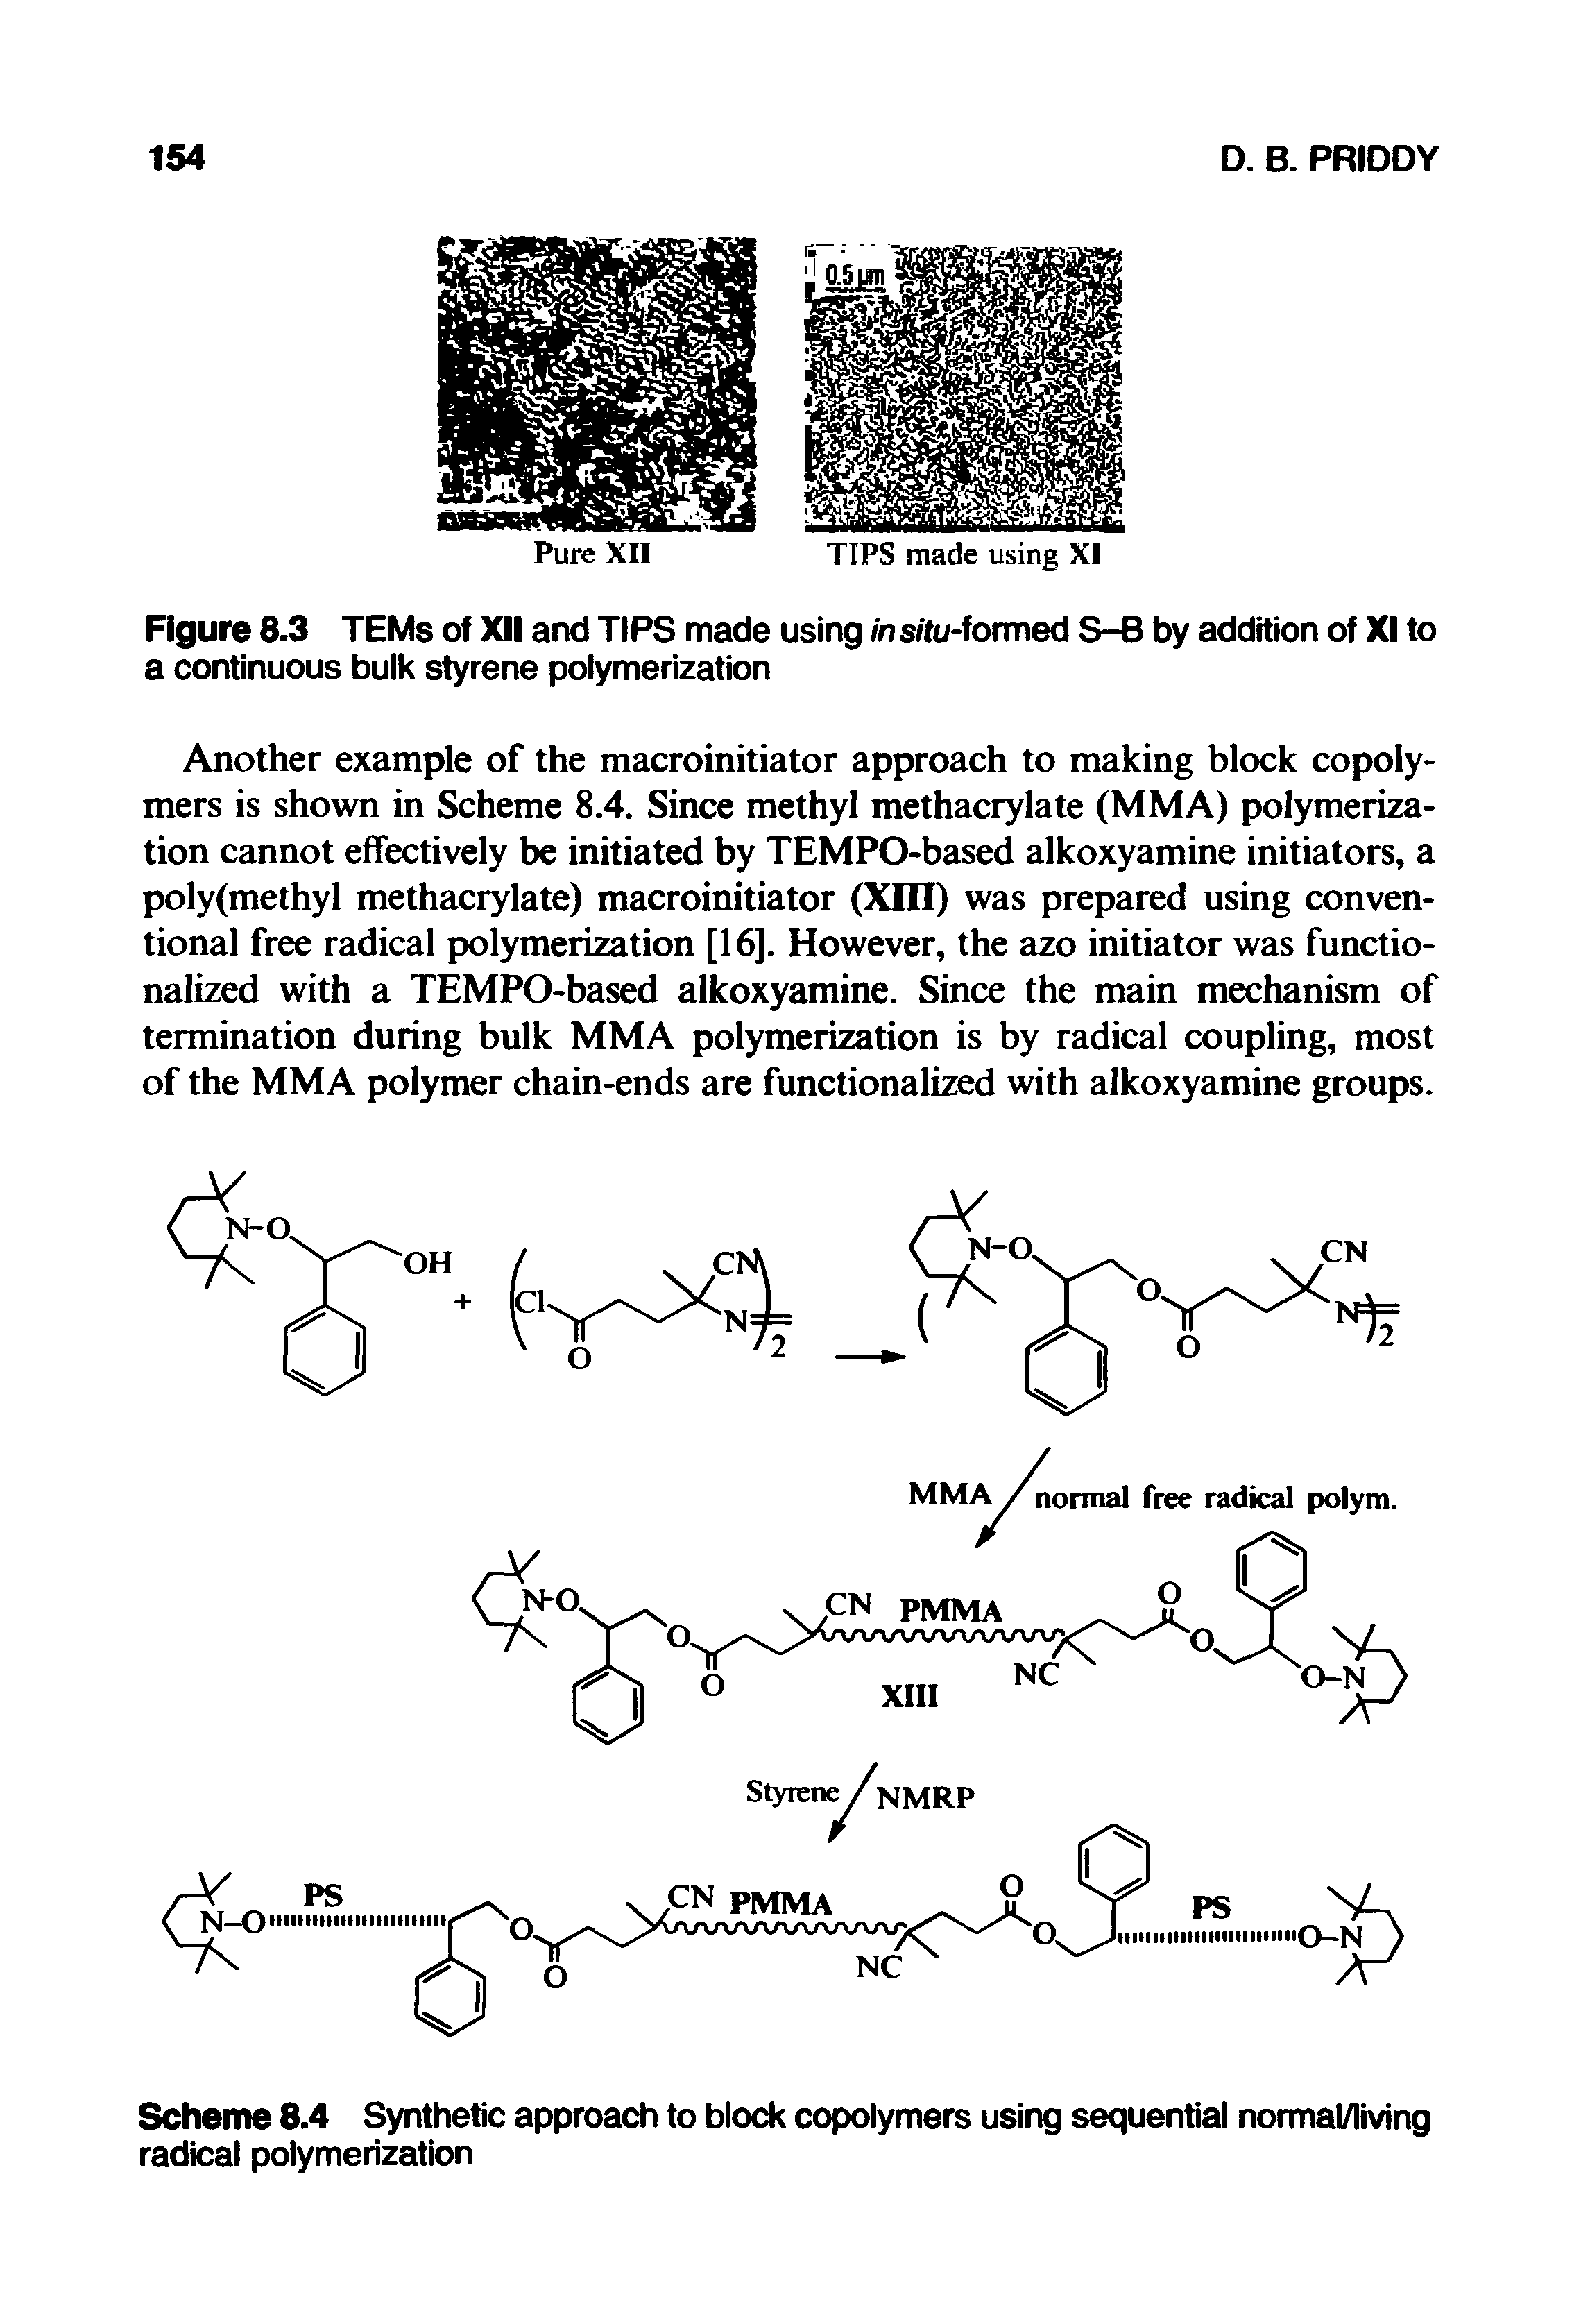 Scheme 8.4 Synthetic approach to block copolymers using sequential normal/living radical polymerization...